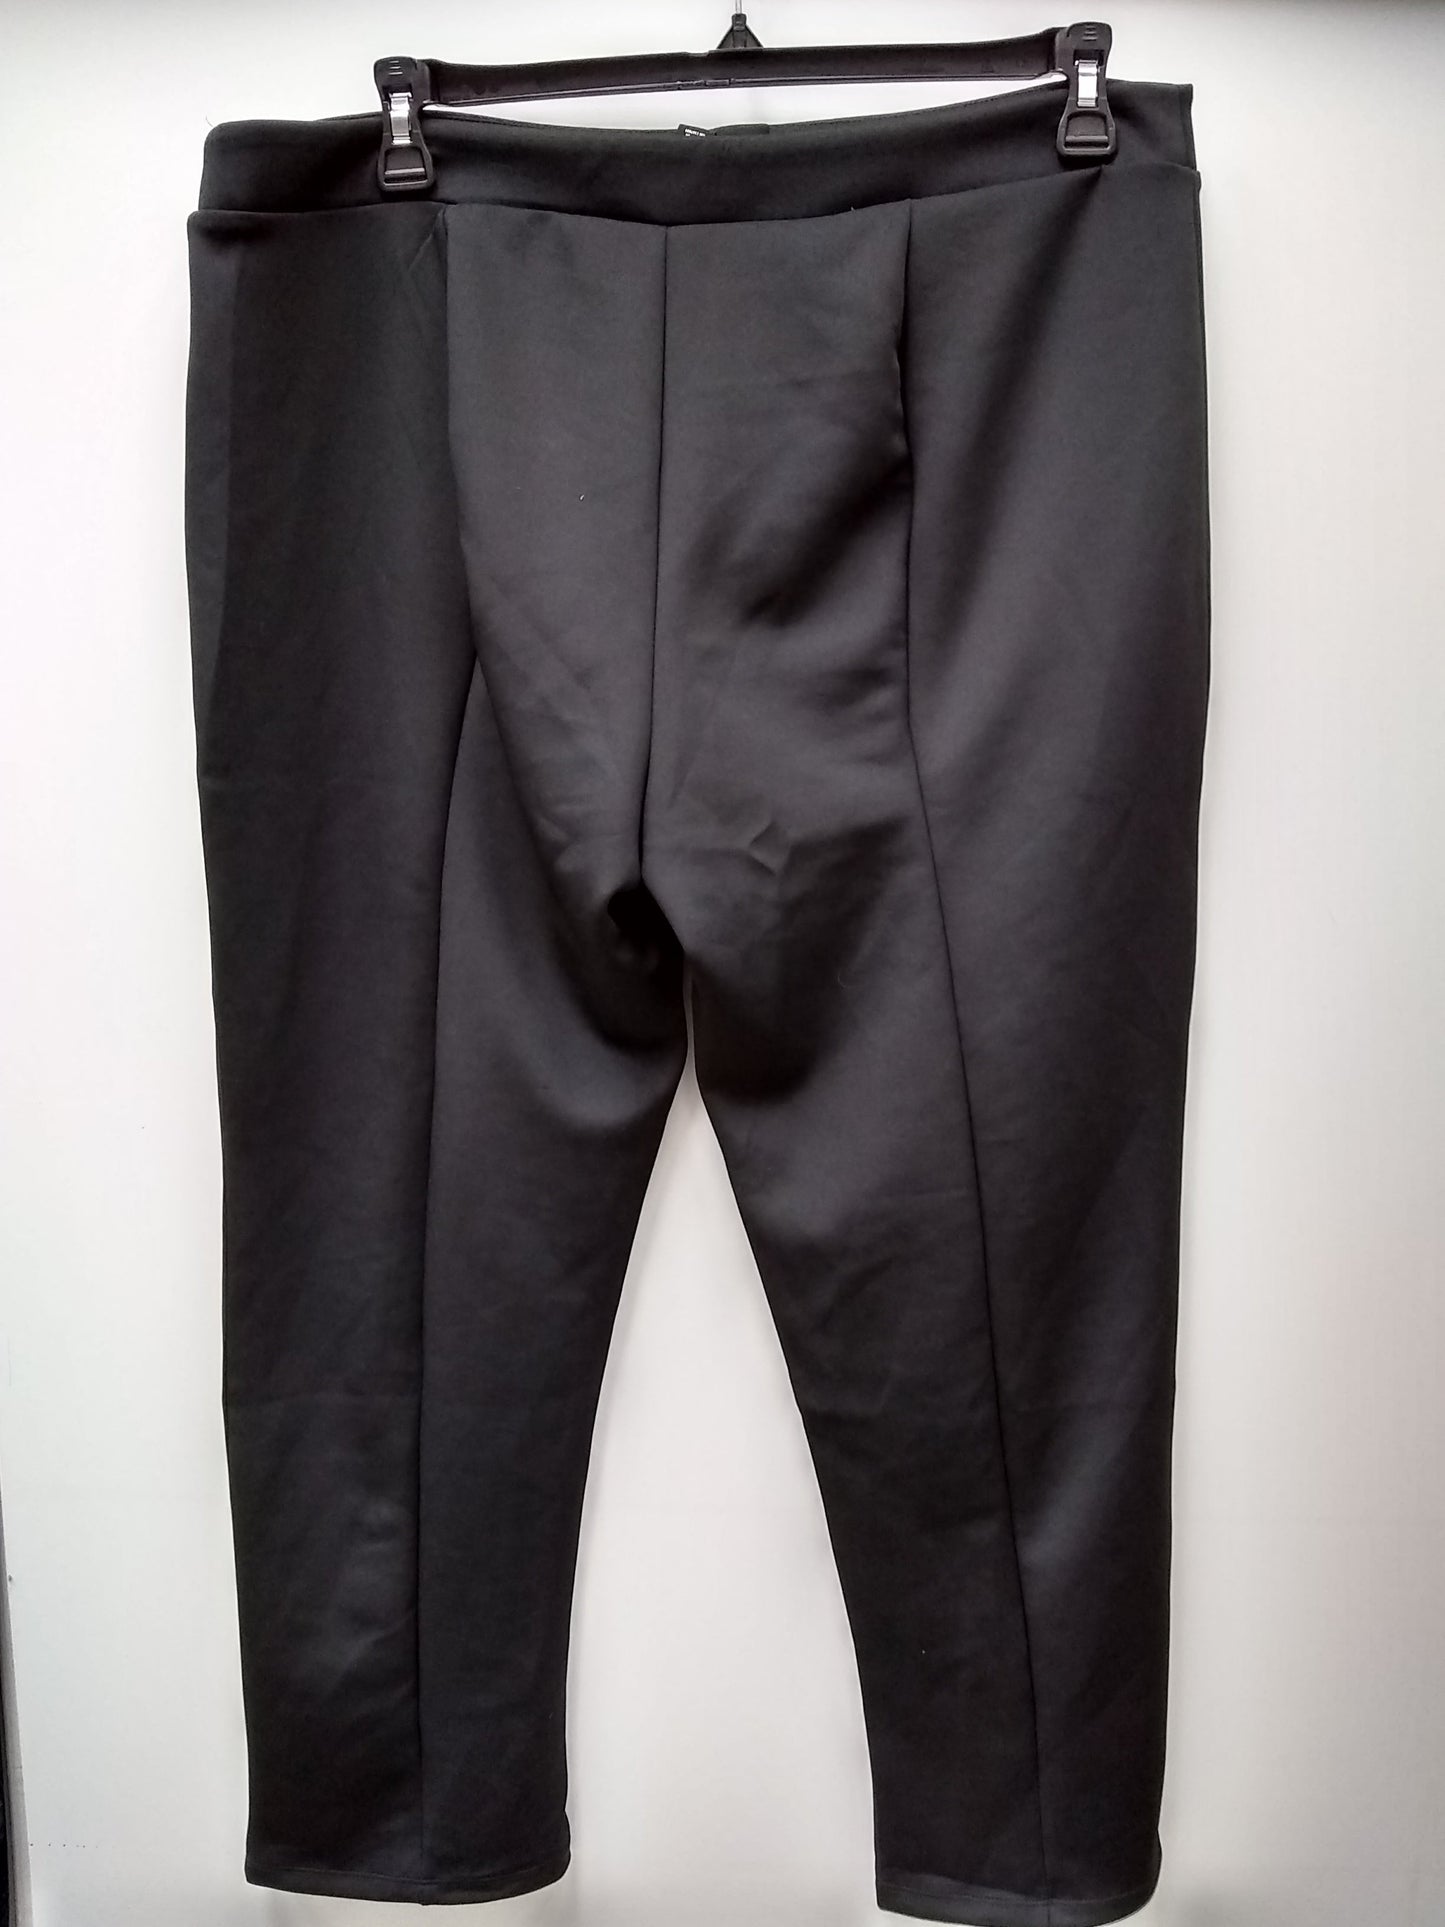 WHO WHAT WEAR SEAM FRONT KNIT PANT JET BLACK 16